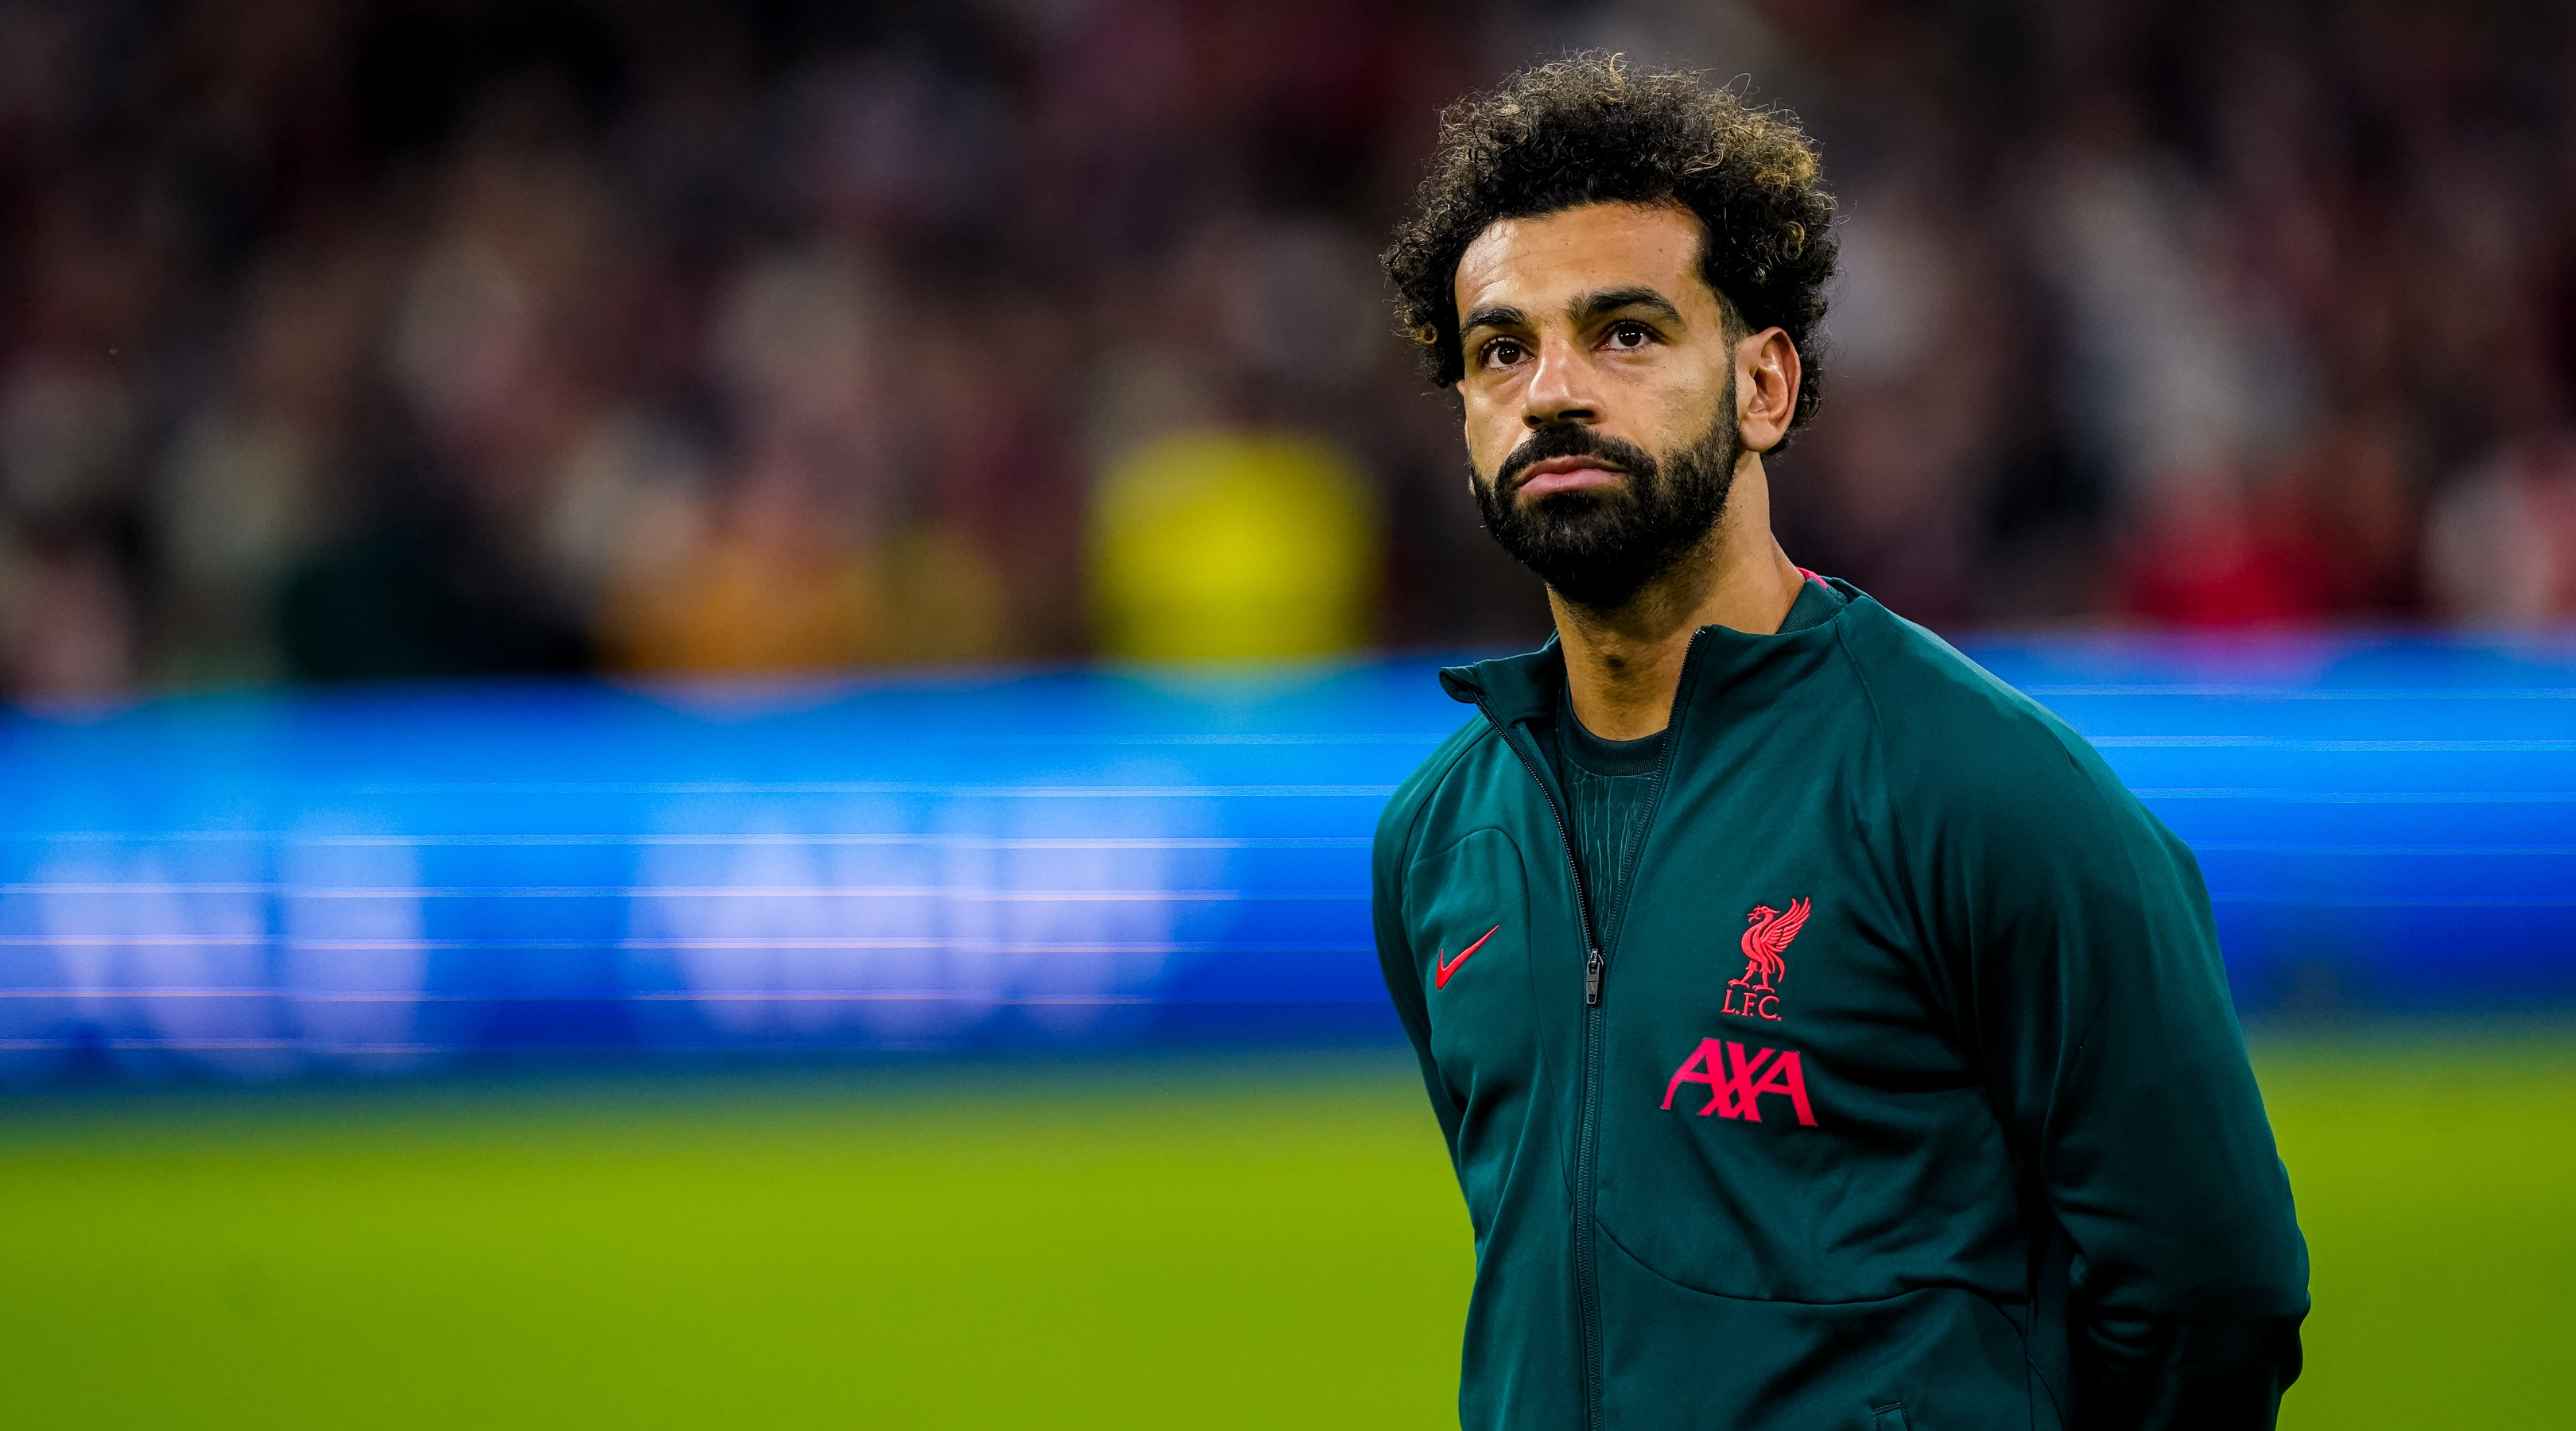 Liverpool forward Mohamed Salah looks on prior to the UEFA Champions League match between Ajax and Liverpool on 26 October, 2022 at the Johan Cruijff ArenA, Amsterdam, Netherlands